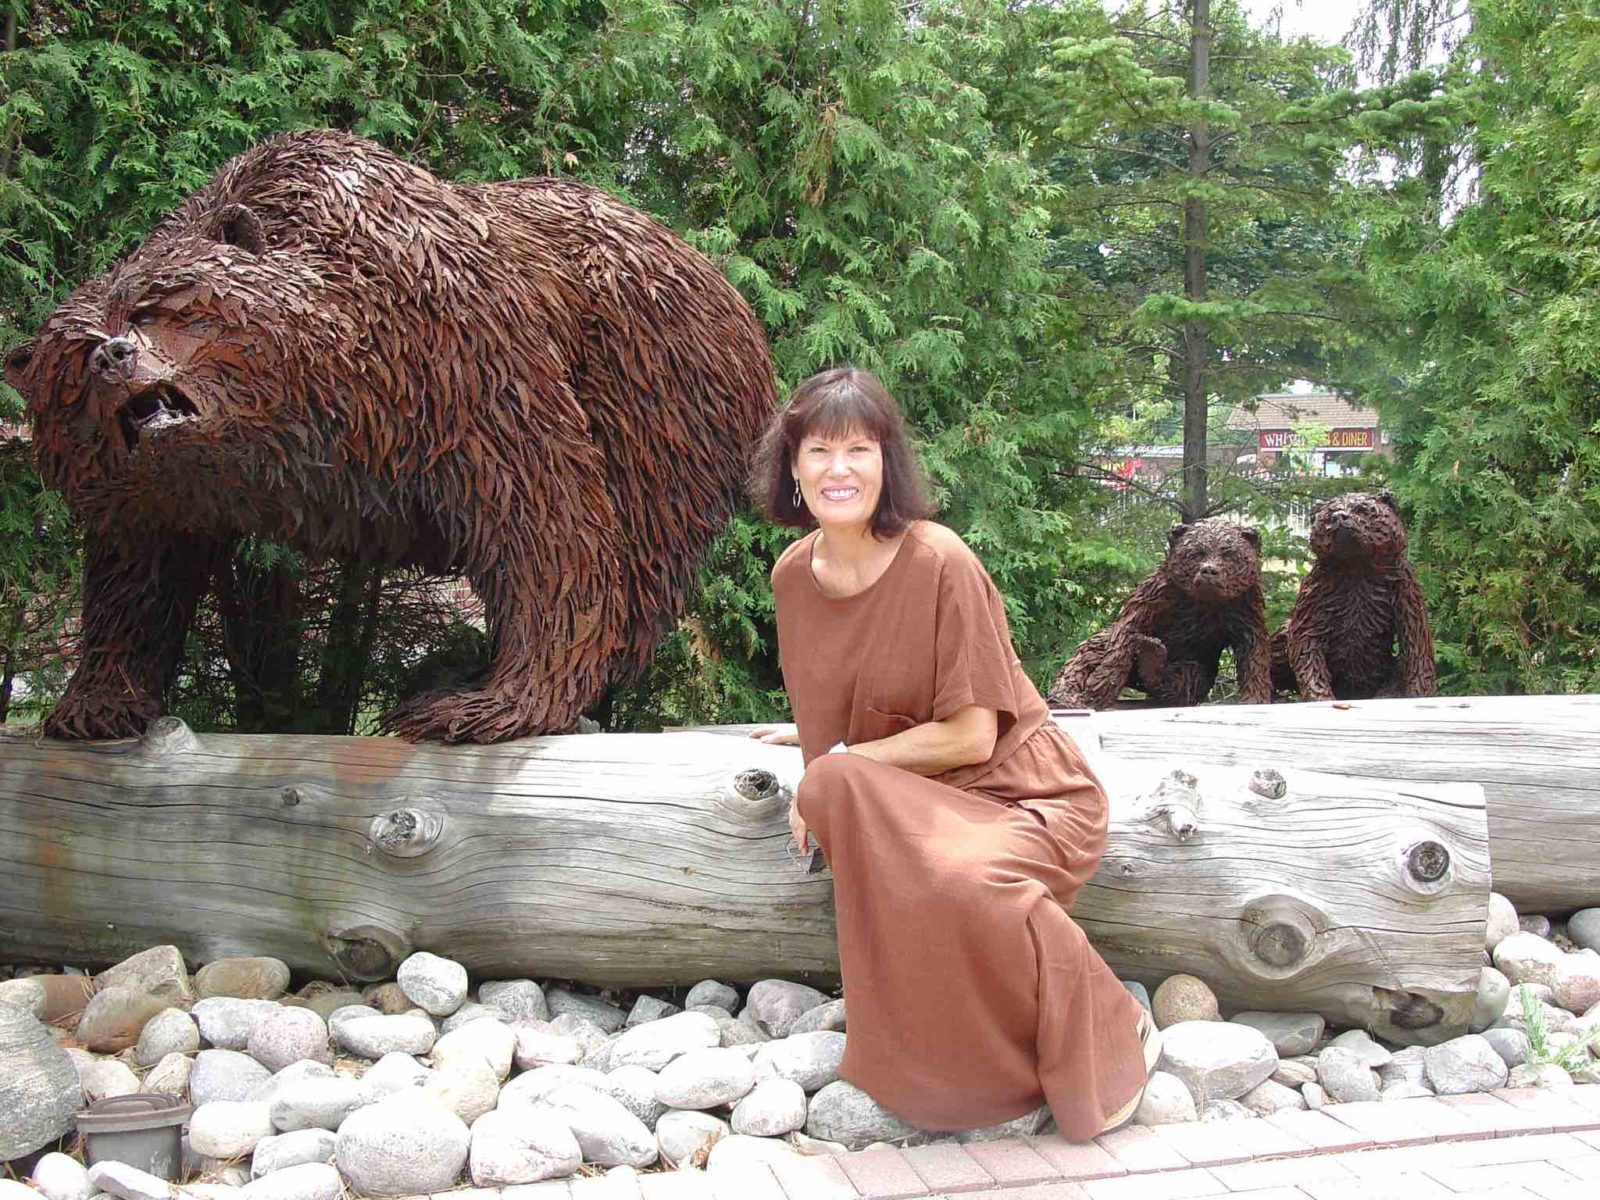 Artist Hilary Clarke Cole seated next to a metal statue of a growling bear